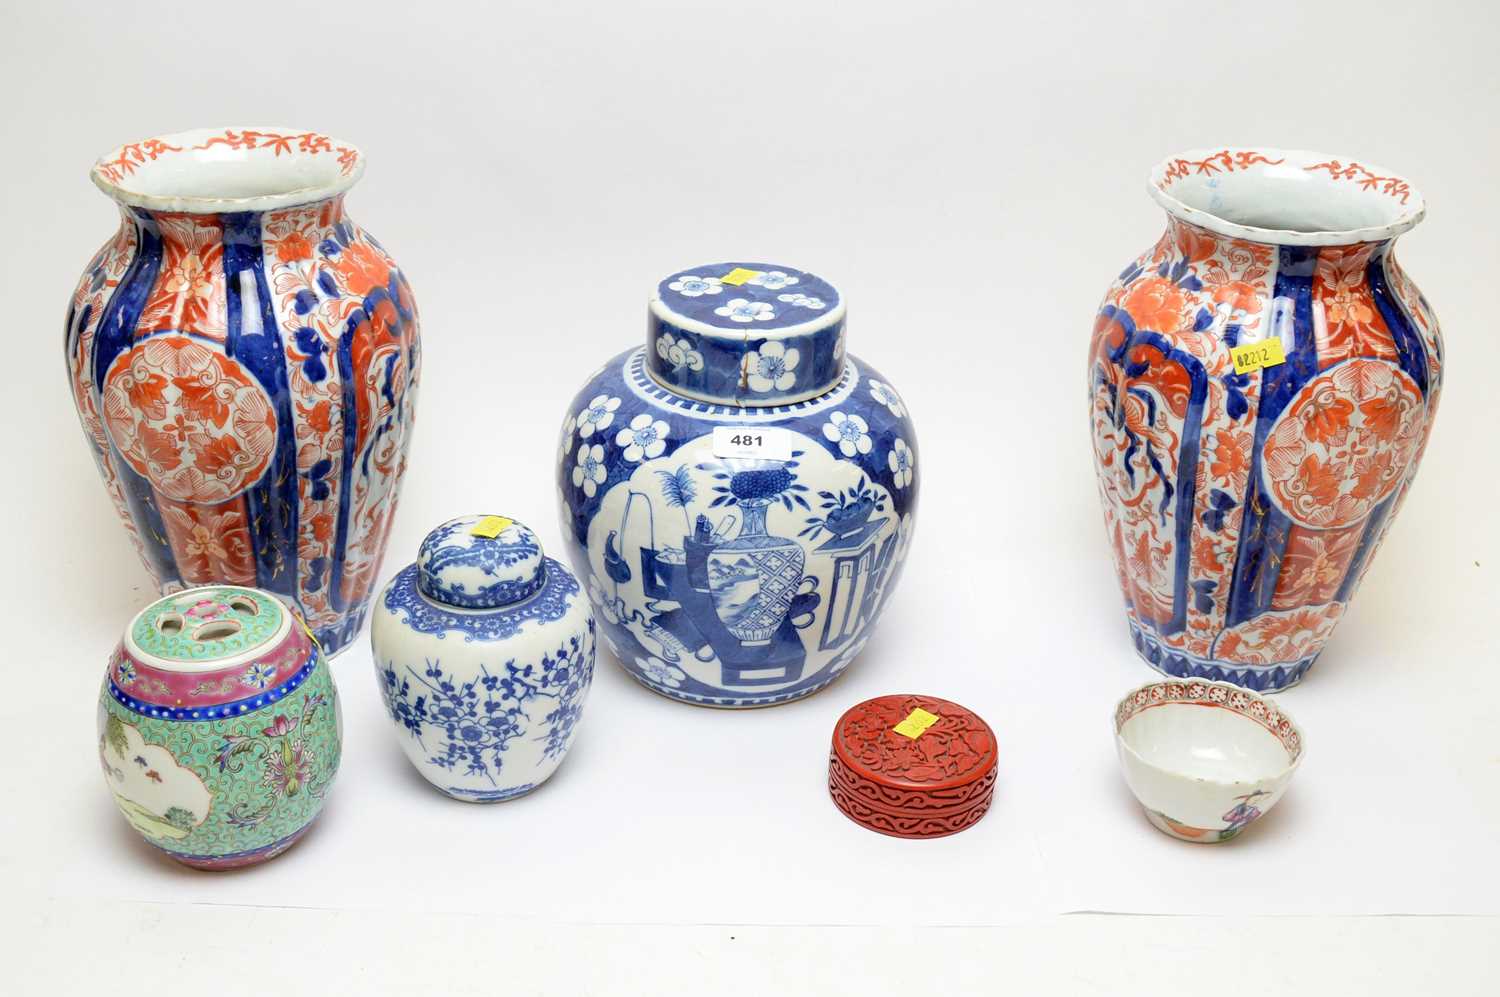 Lot 481 - Pair of Japanese vases; and other Asian ceramics.